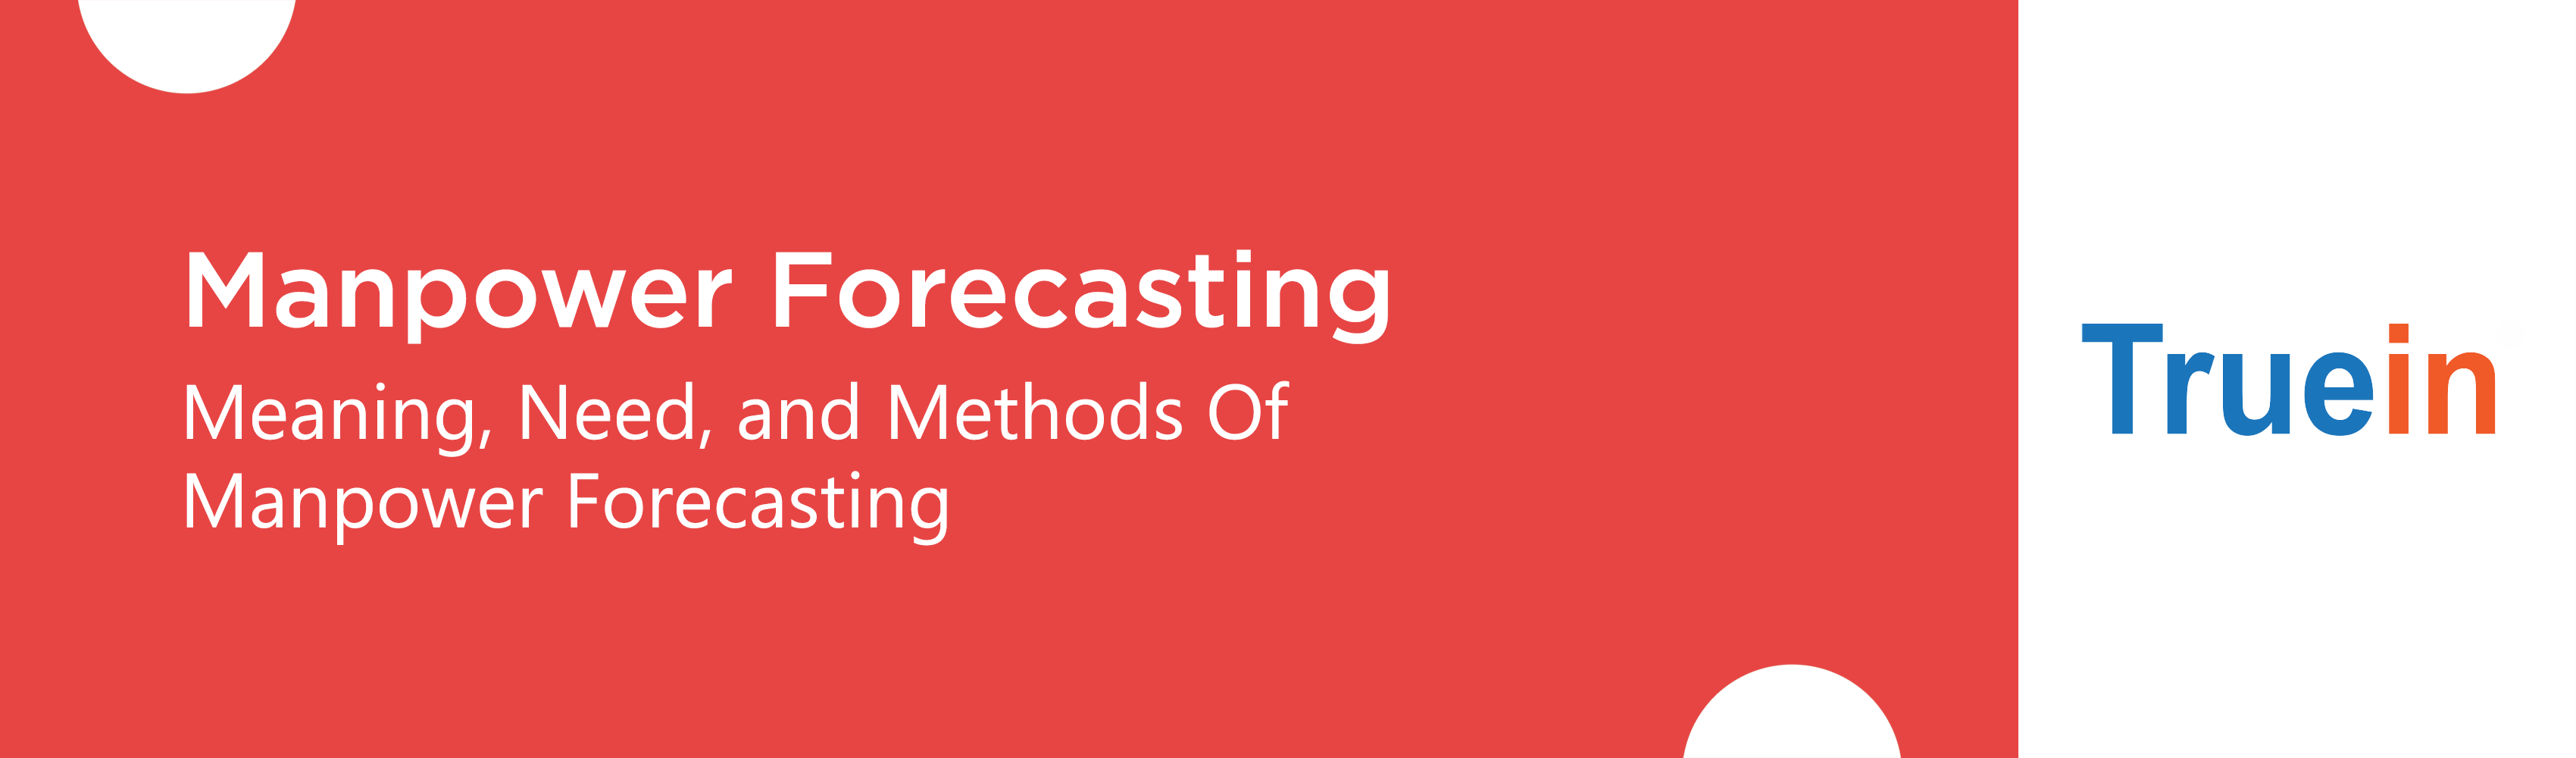 Manpower Forecasting - Meaning, Need, and Methods Of Manpower Forecasting